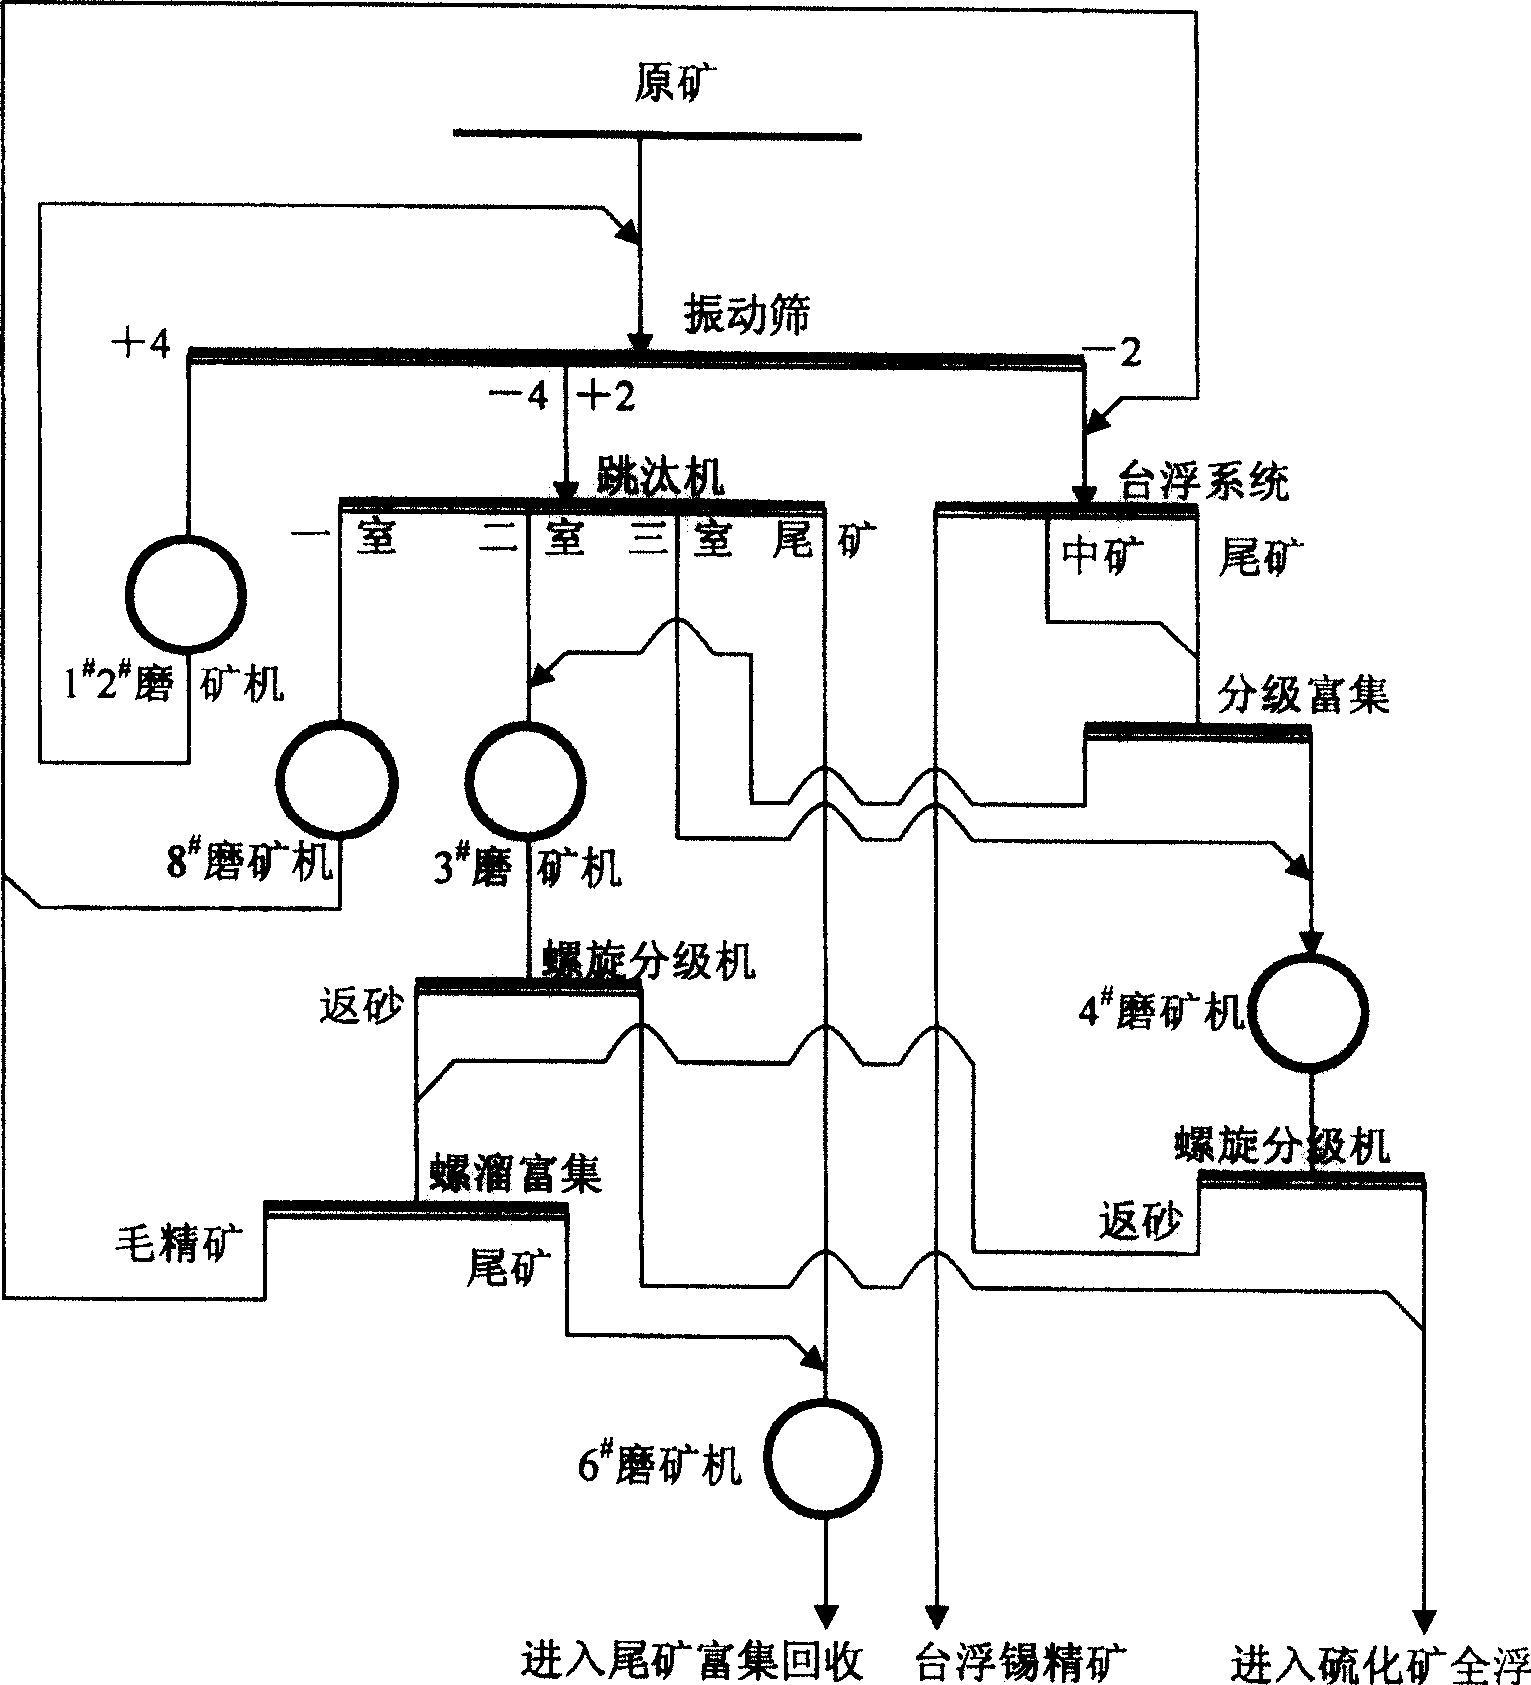 Step branched ore milling and milling and dressing circular method